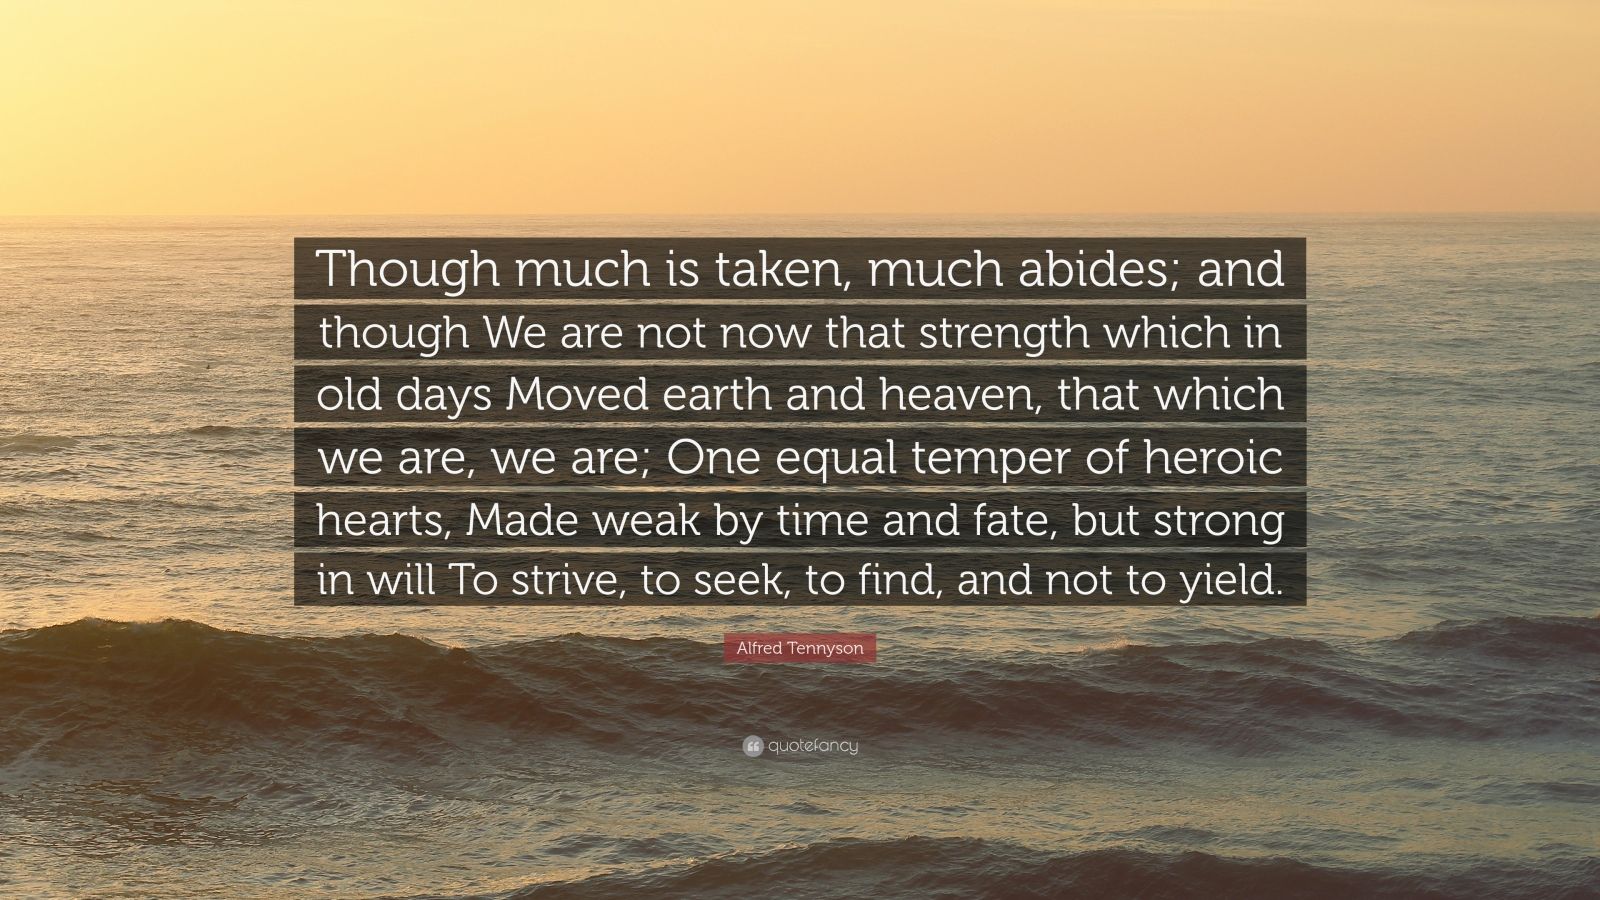 Alfred Tennyson Quote Though Much Is Taken Much Abides And Though We Are Not Now That